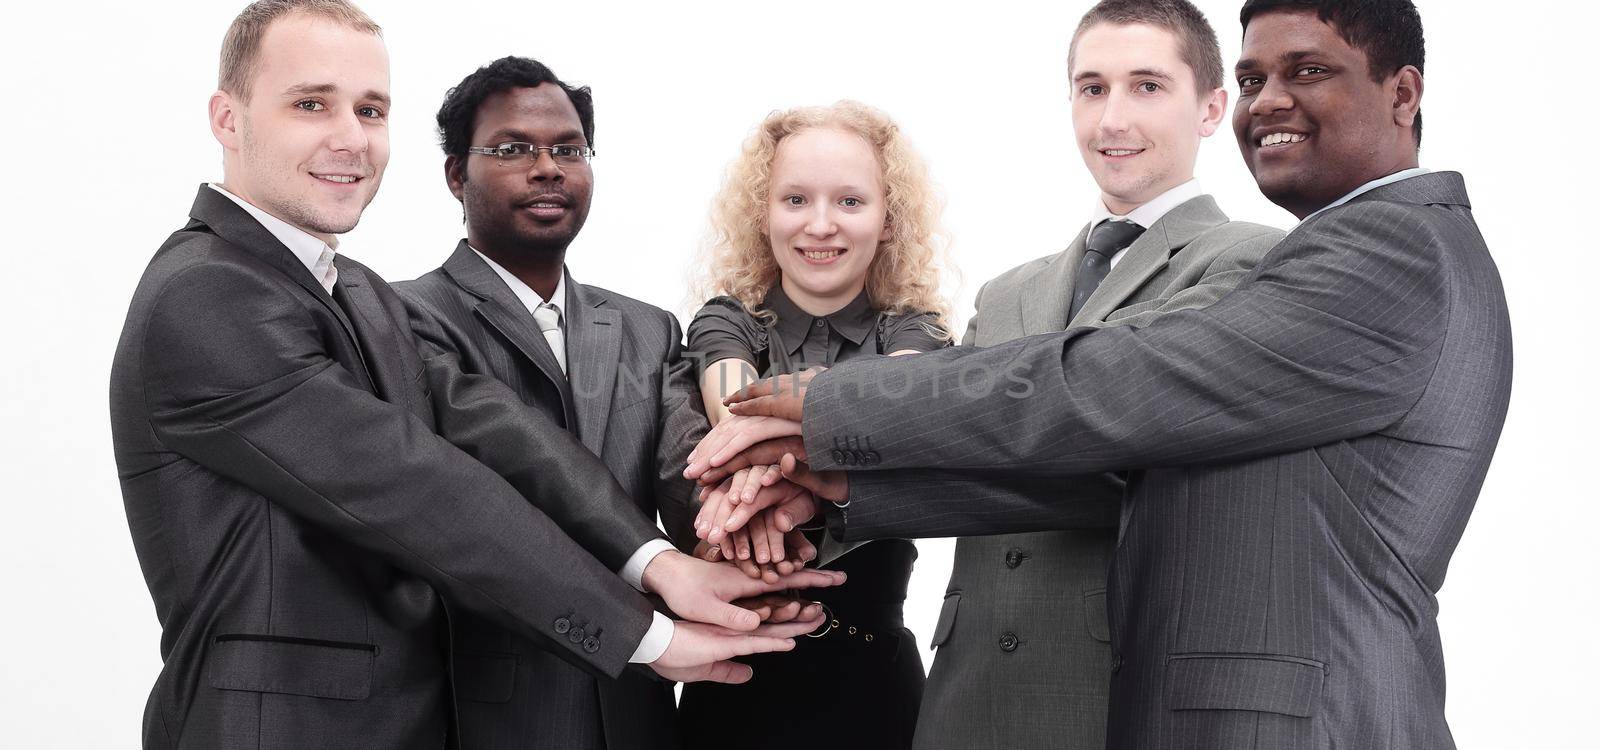 Business team showing union with their hands together forming a pile.photo with copy space